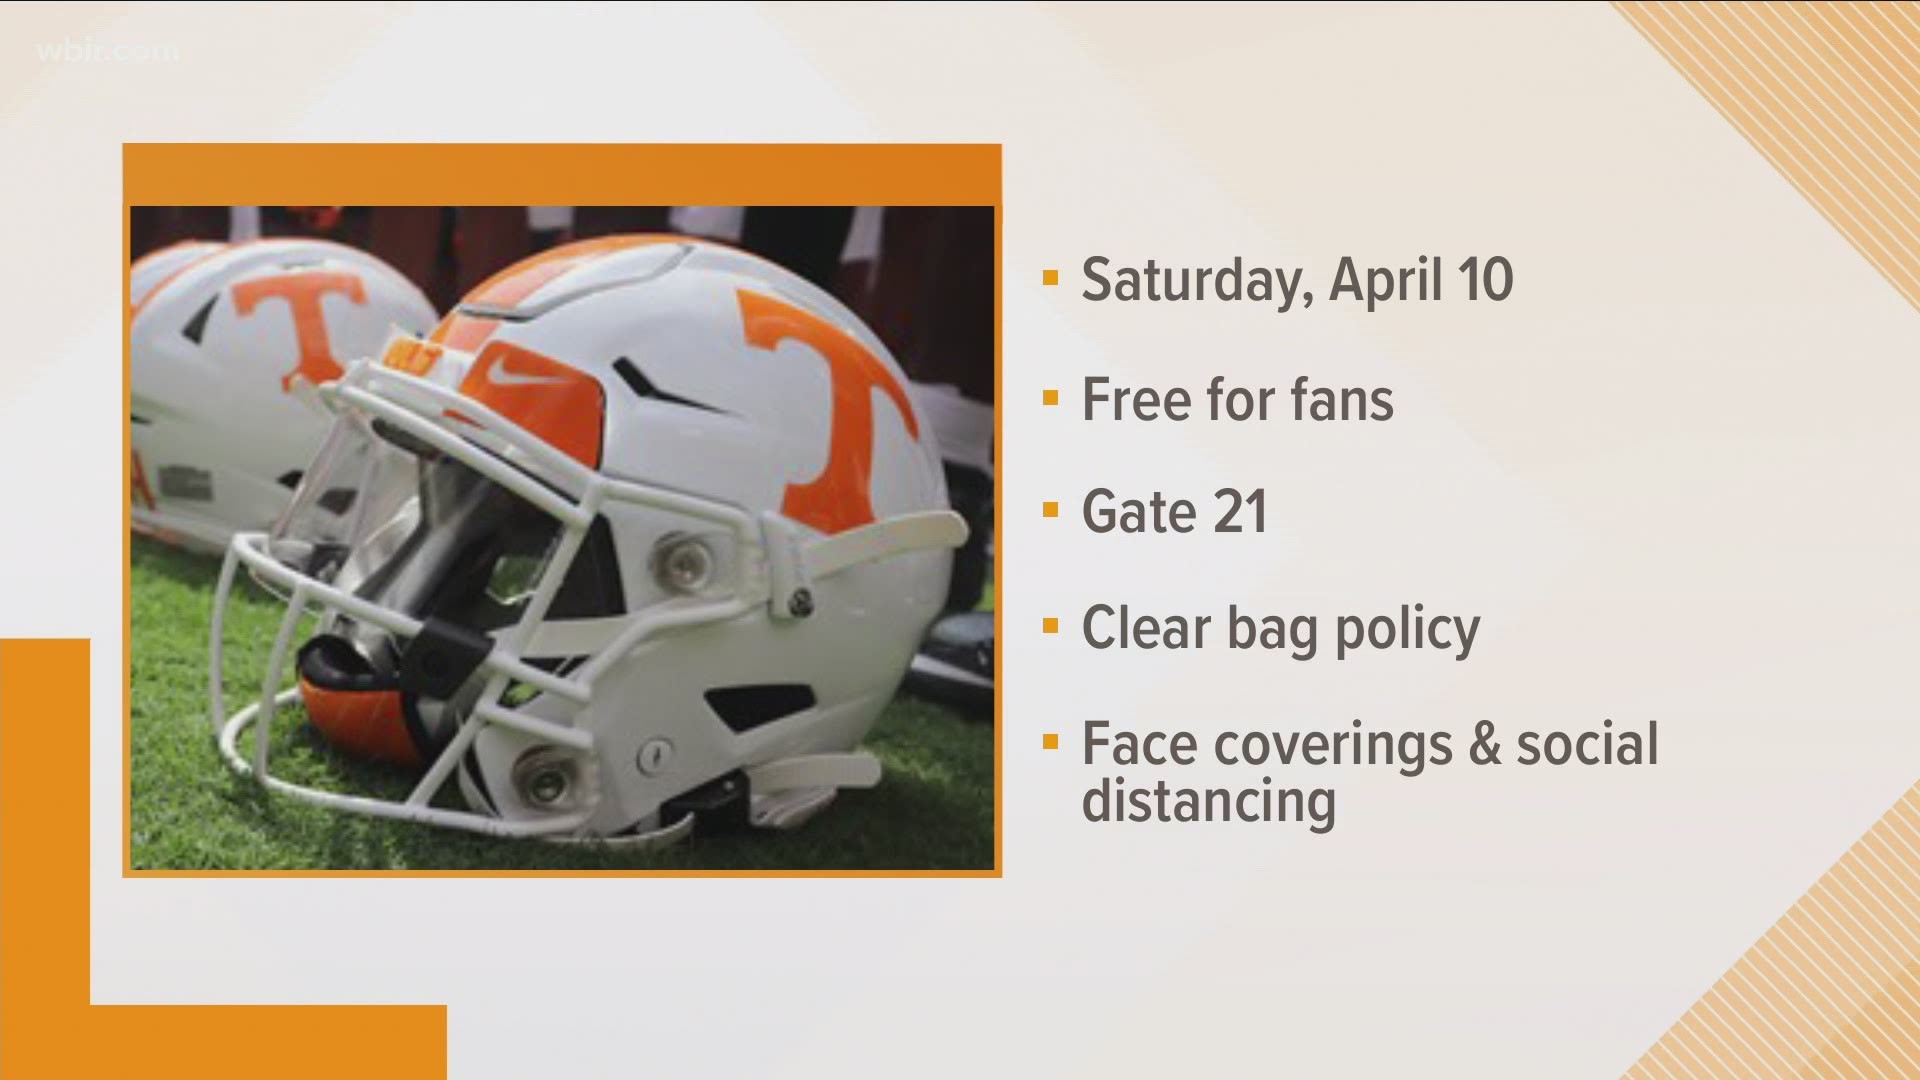 Tennessee fans will get their first glimpse of head coach Josh Heupel's 2021 team as the Vols hold an open practice for fans on Saturday.